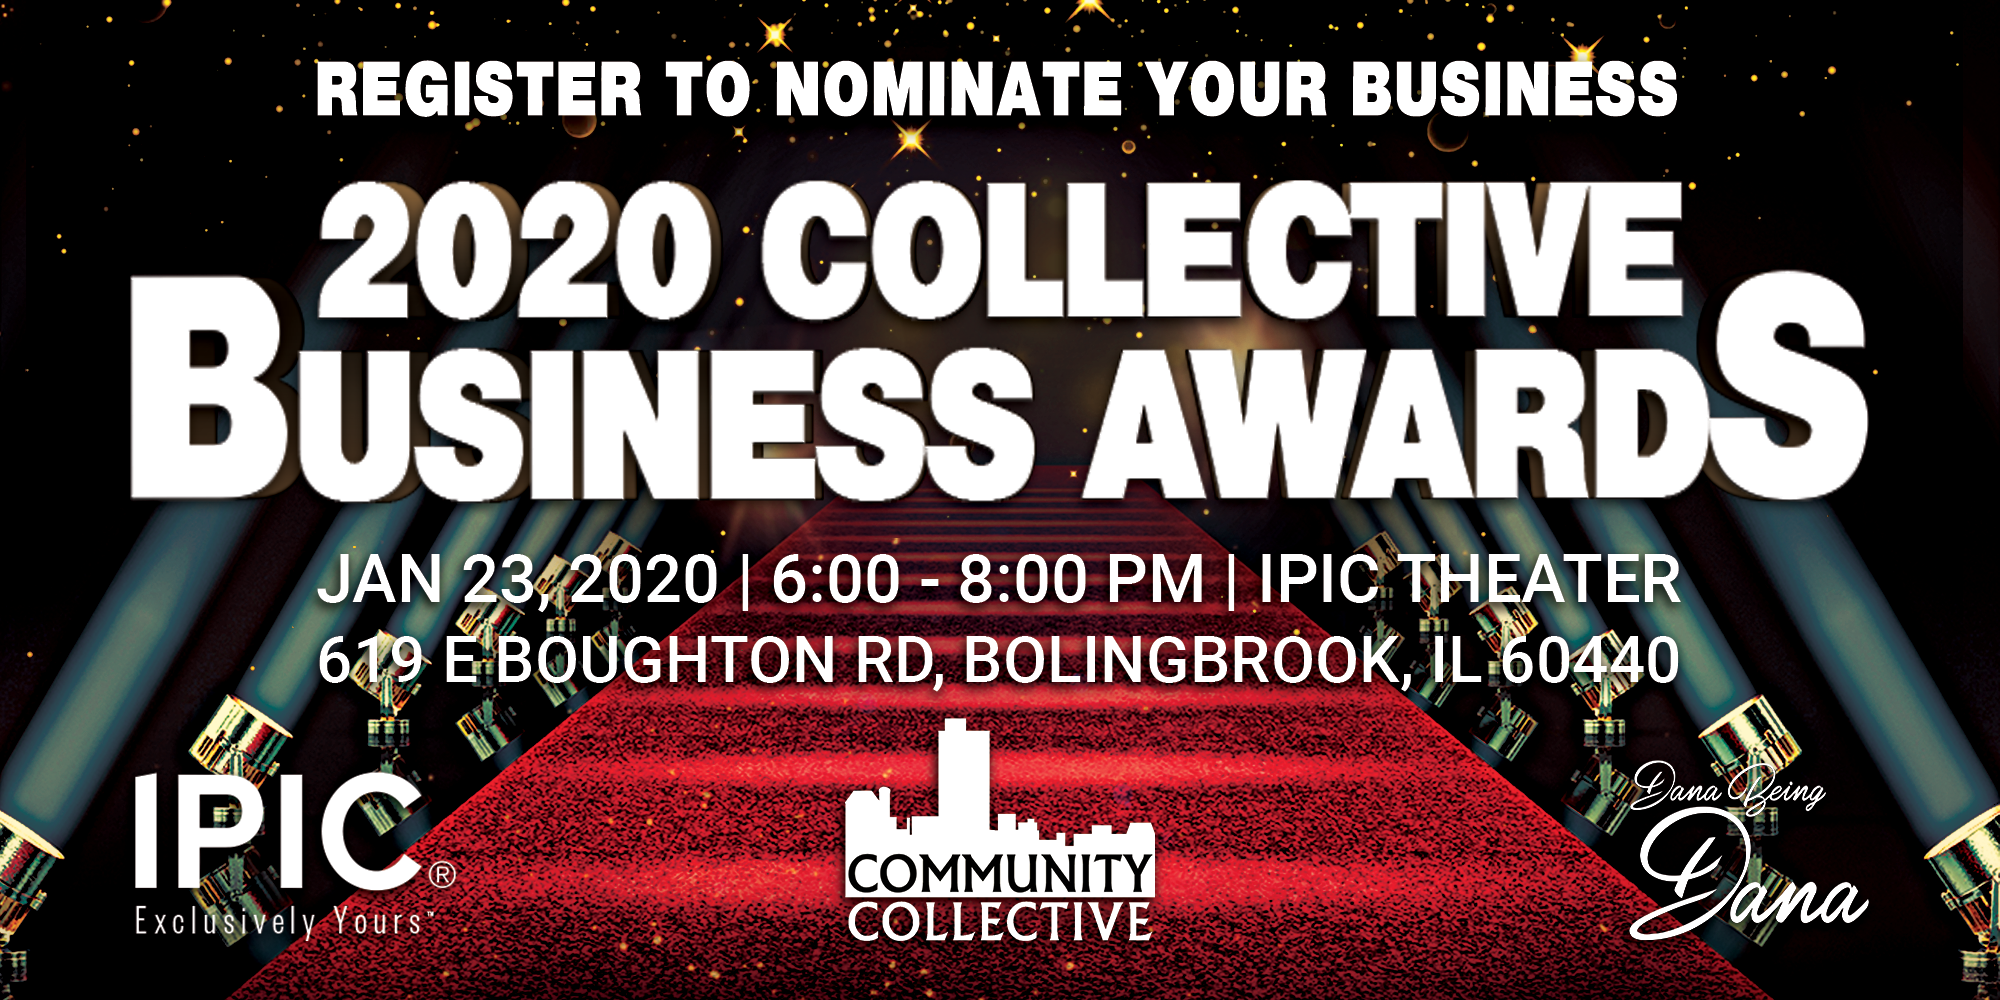 2020 Collective Business Awards